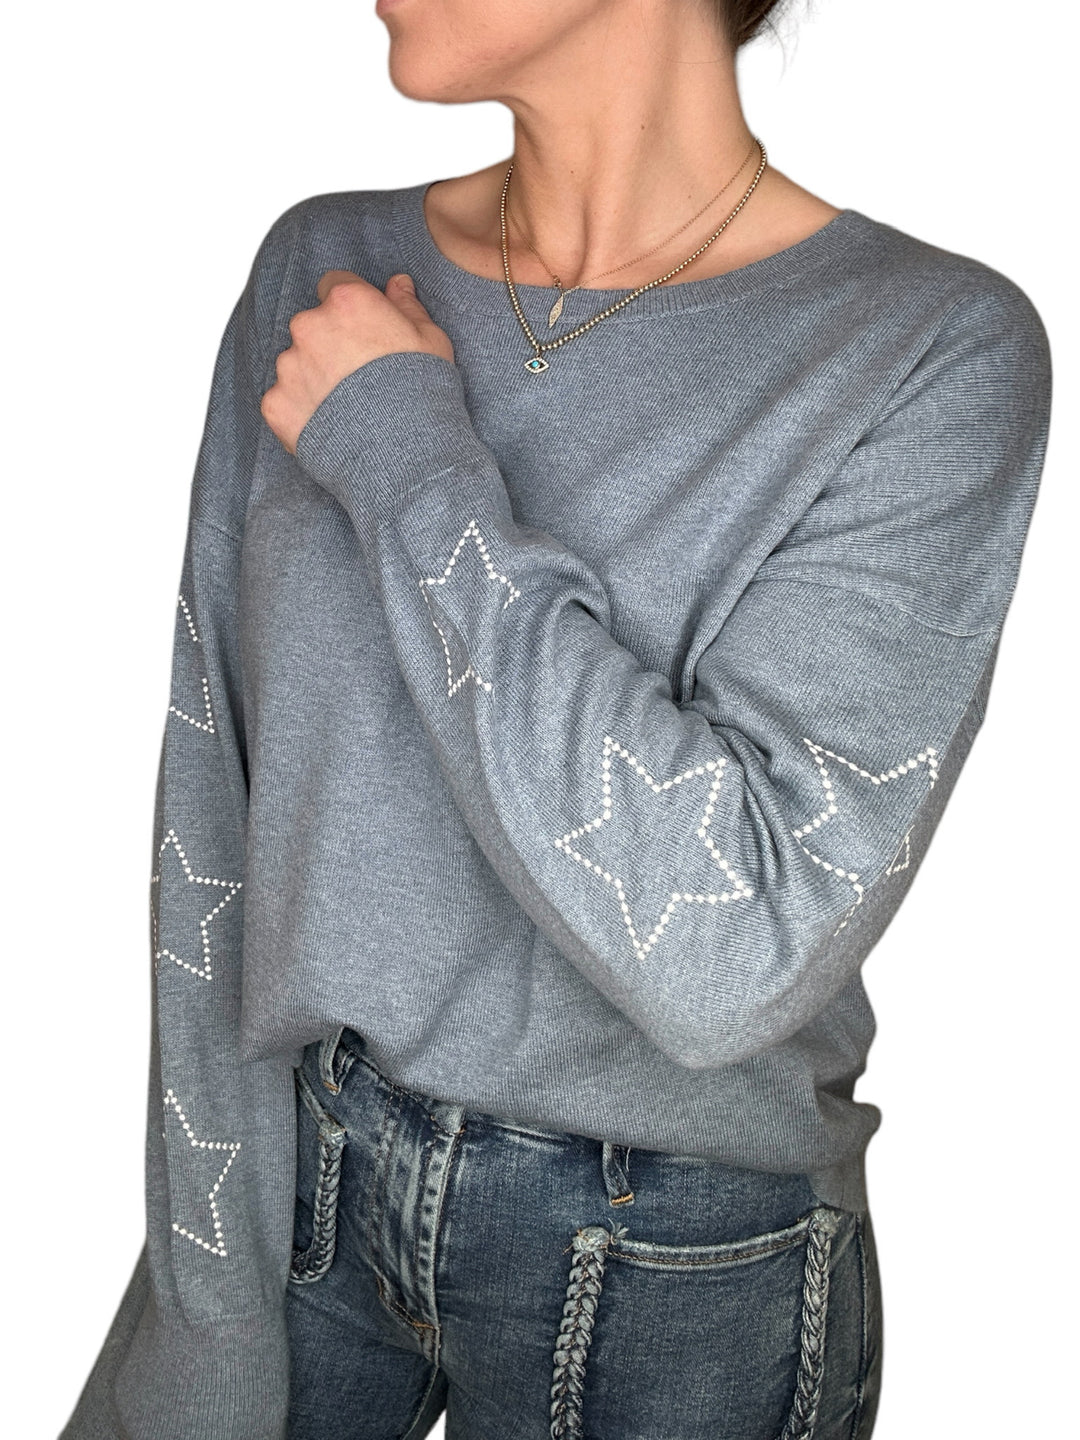 EMBROIDERED STAR SLEEVE SWEATER-CHAMBRAY - Kingfisher Road - Online Boutique